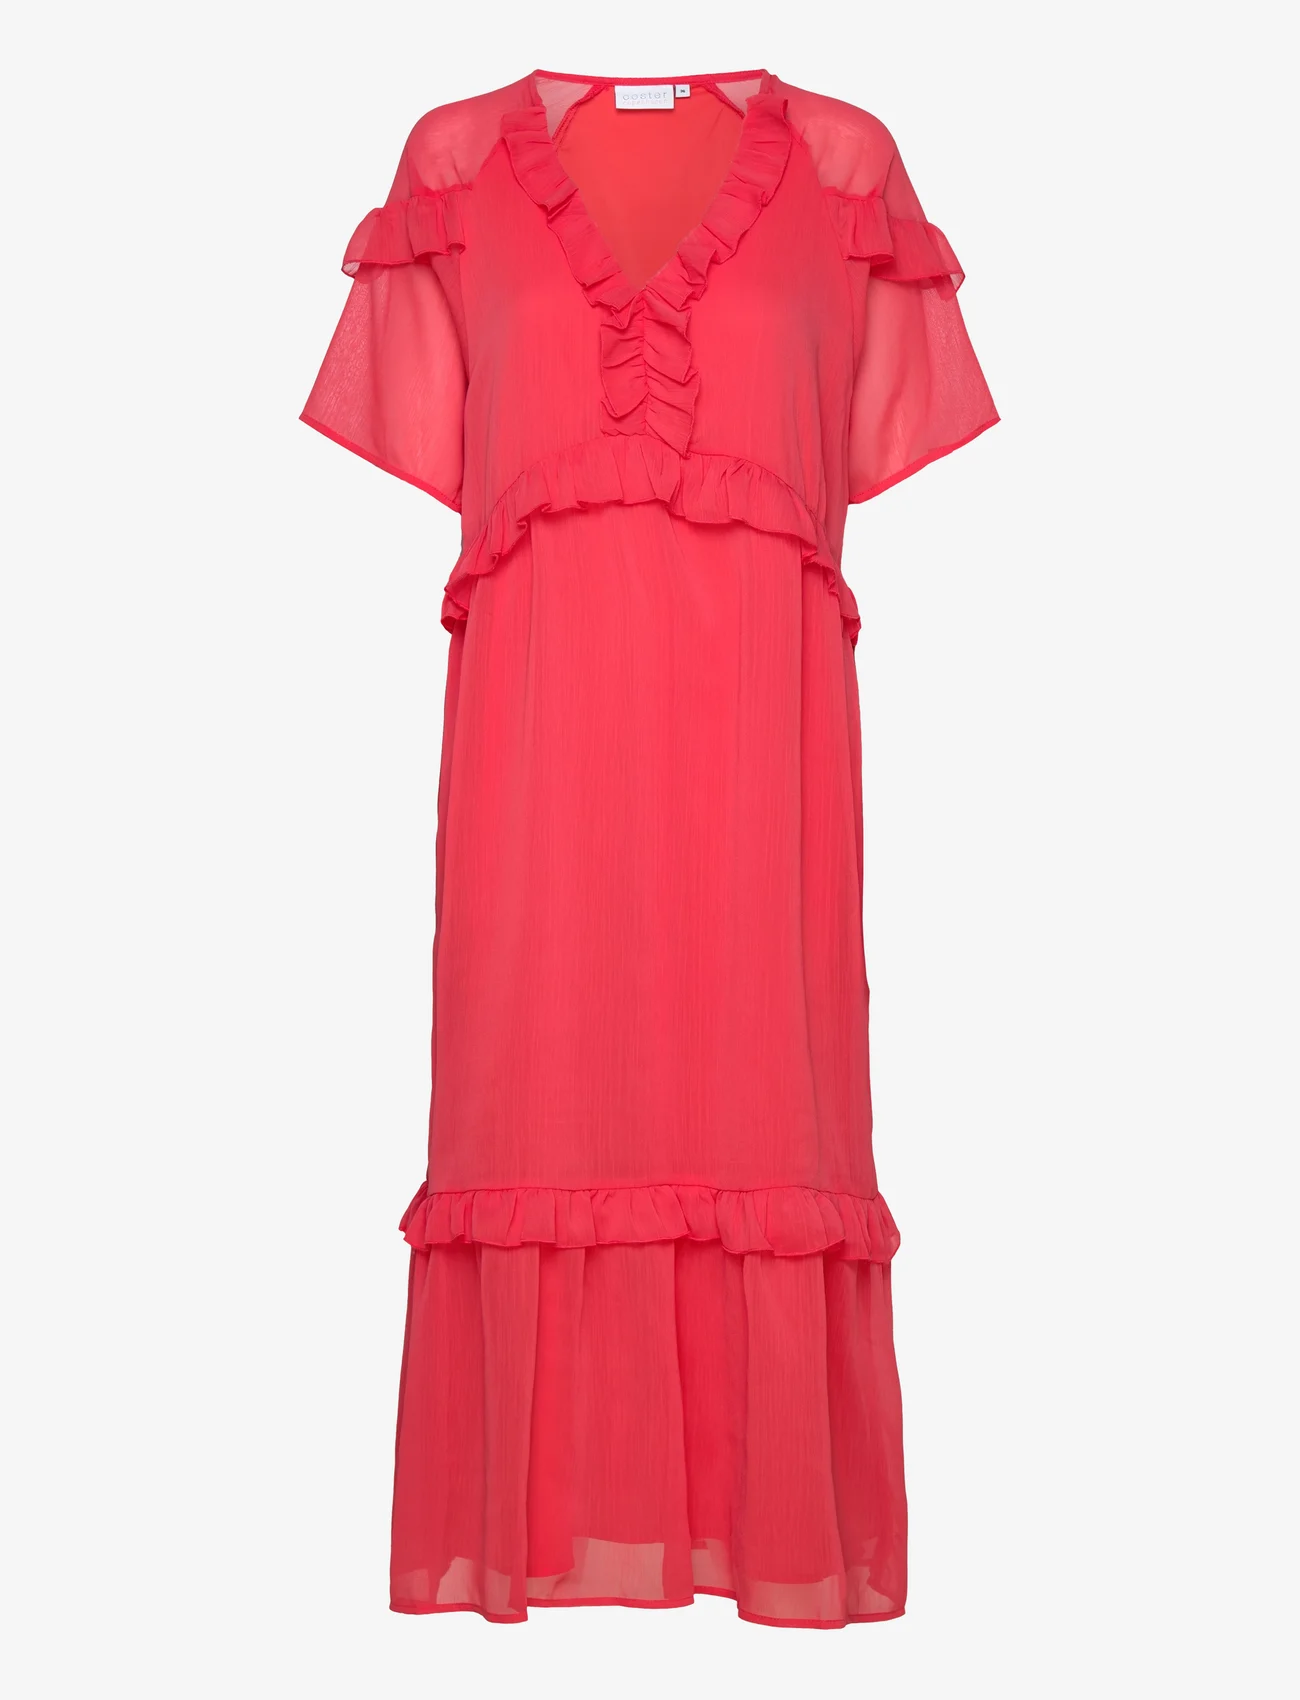 Coster Copenhagen - Long dress with frills - juhlamuotia outlet-hintaan - coral pink - 0